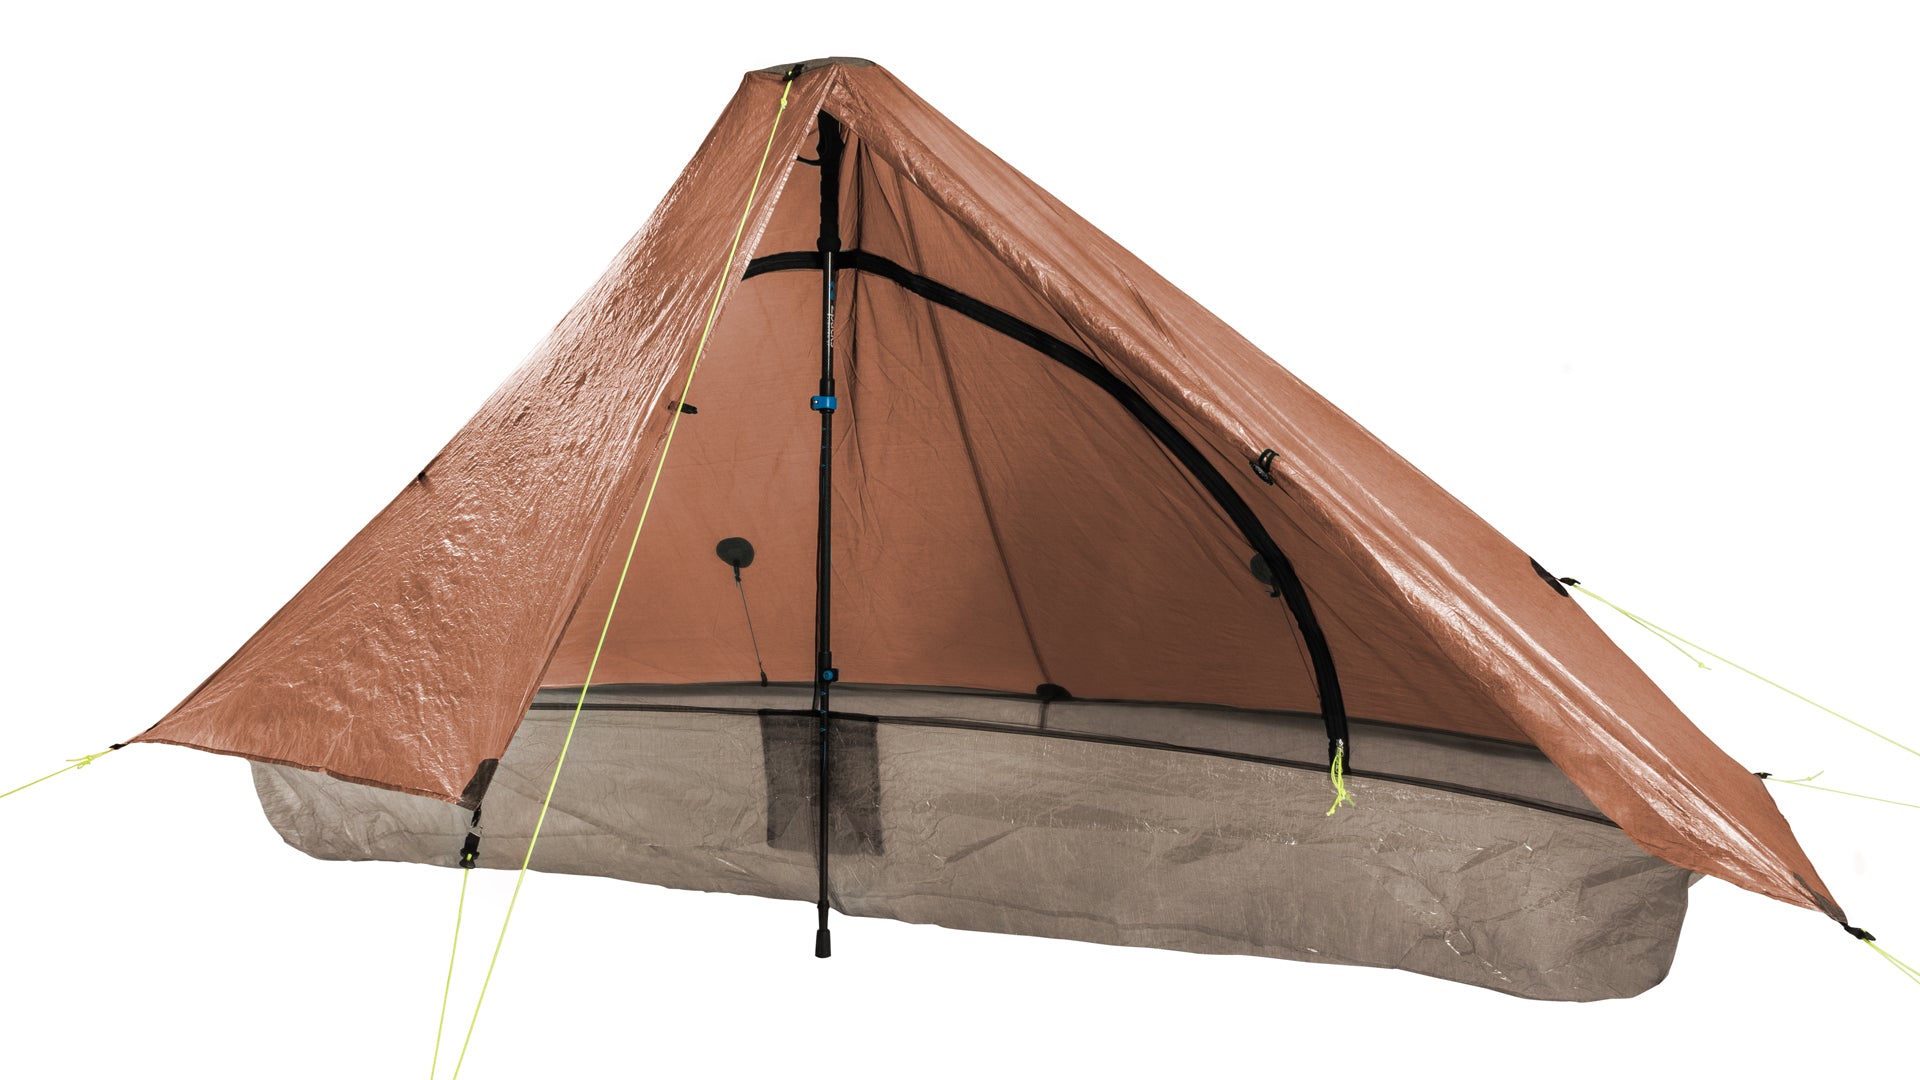 Plexamid Tent - 1P UL Backpacking Shelter